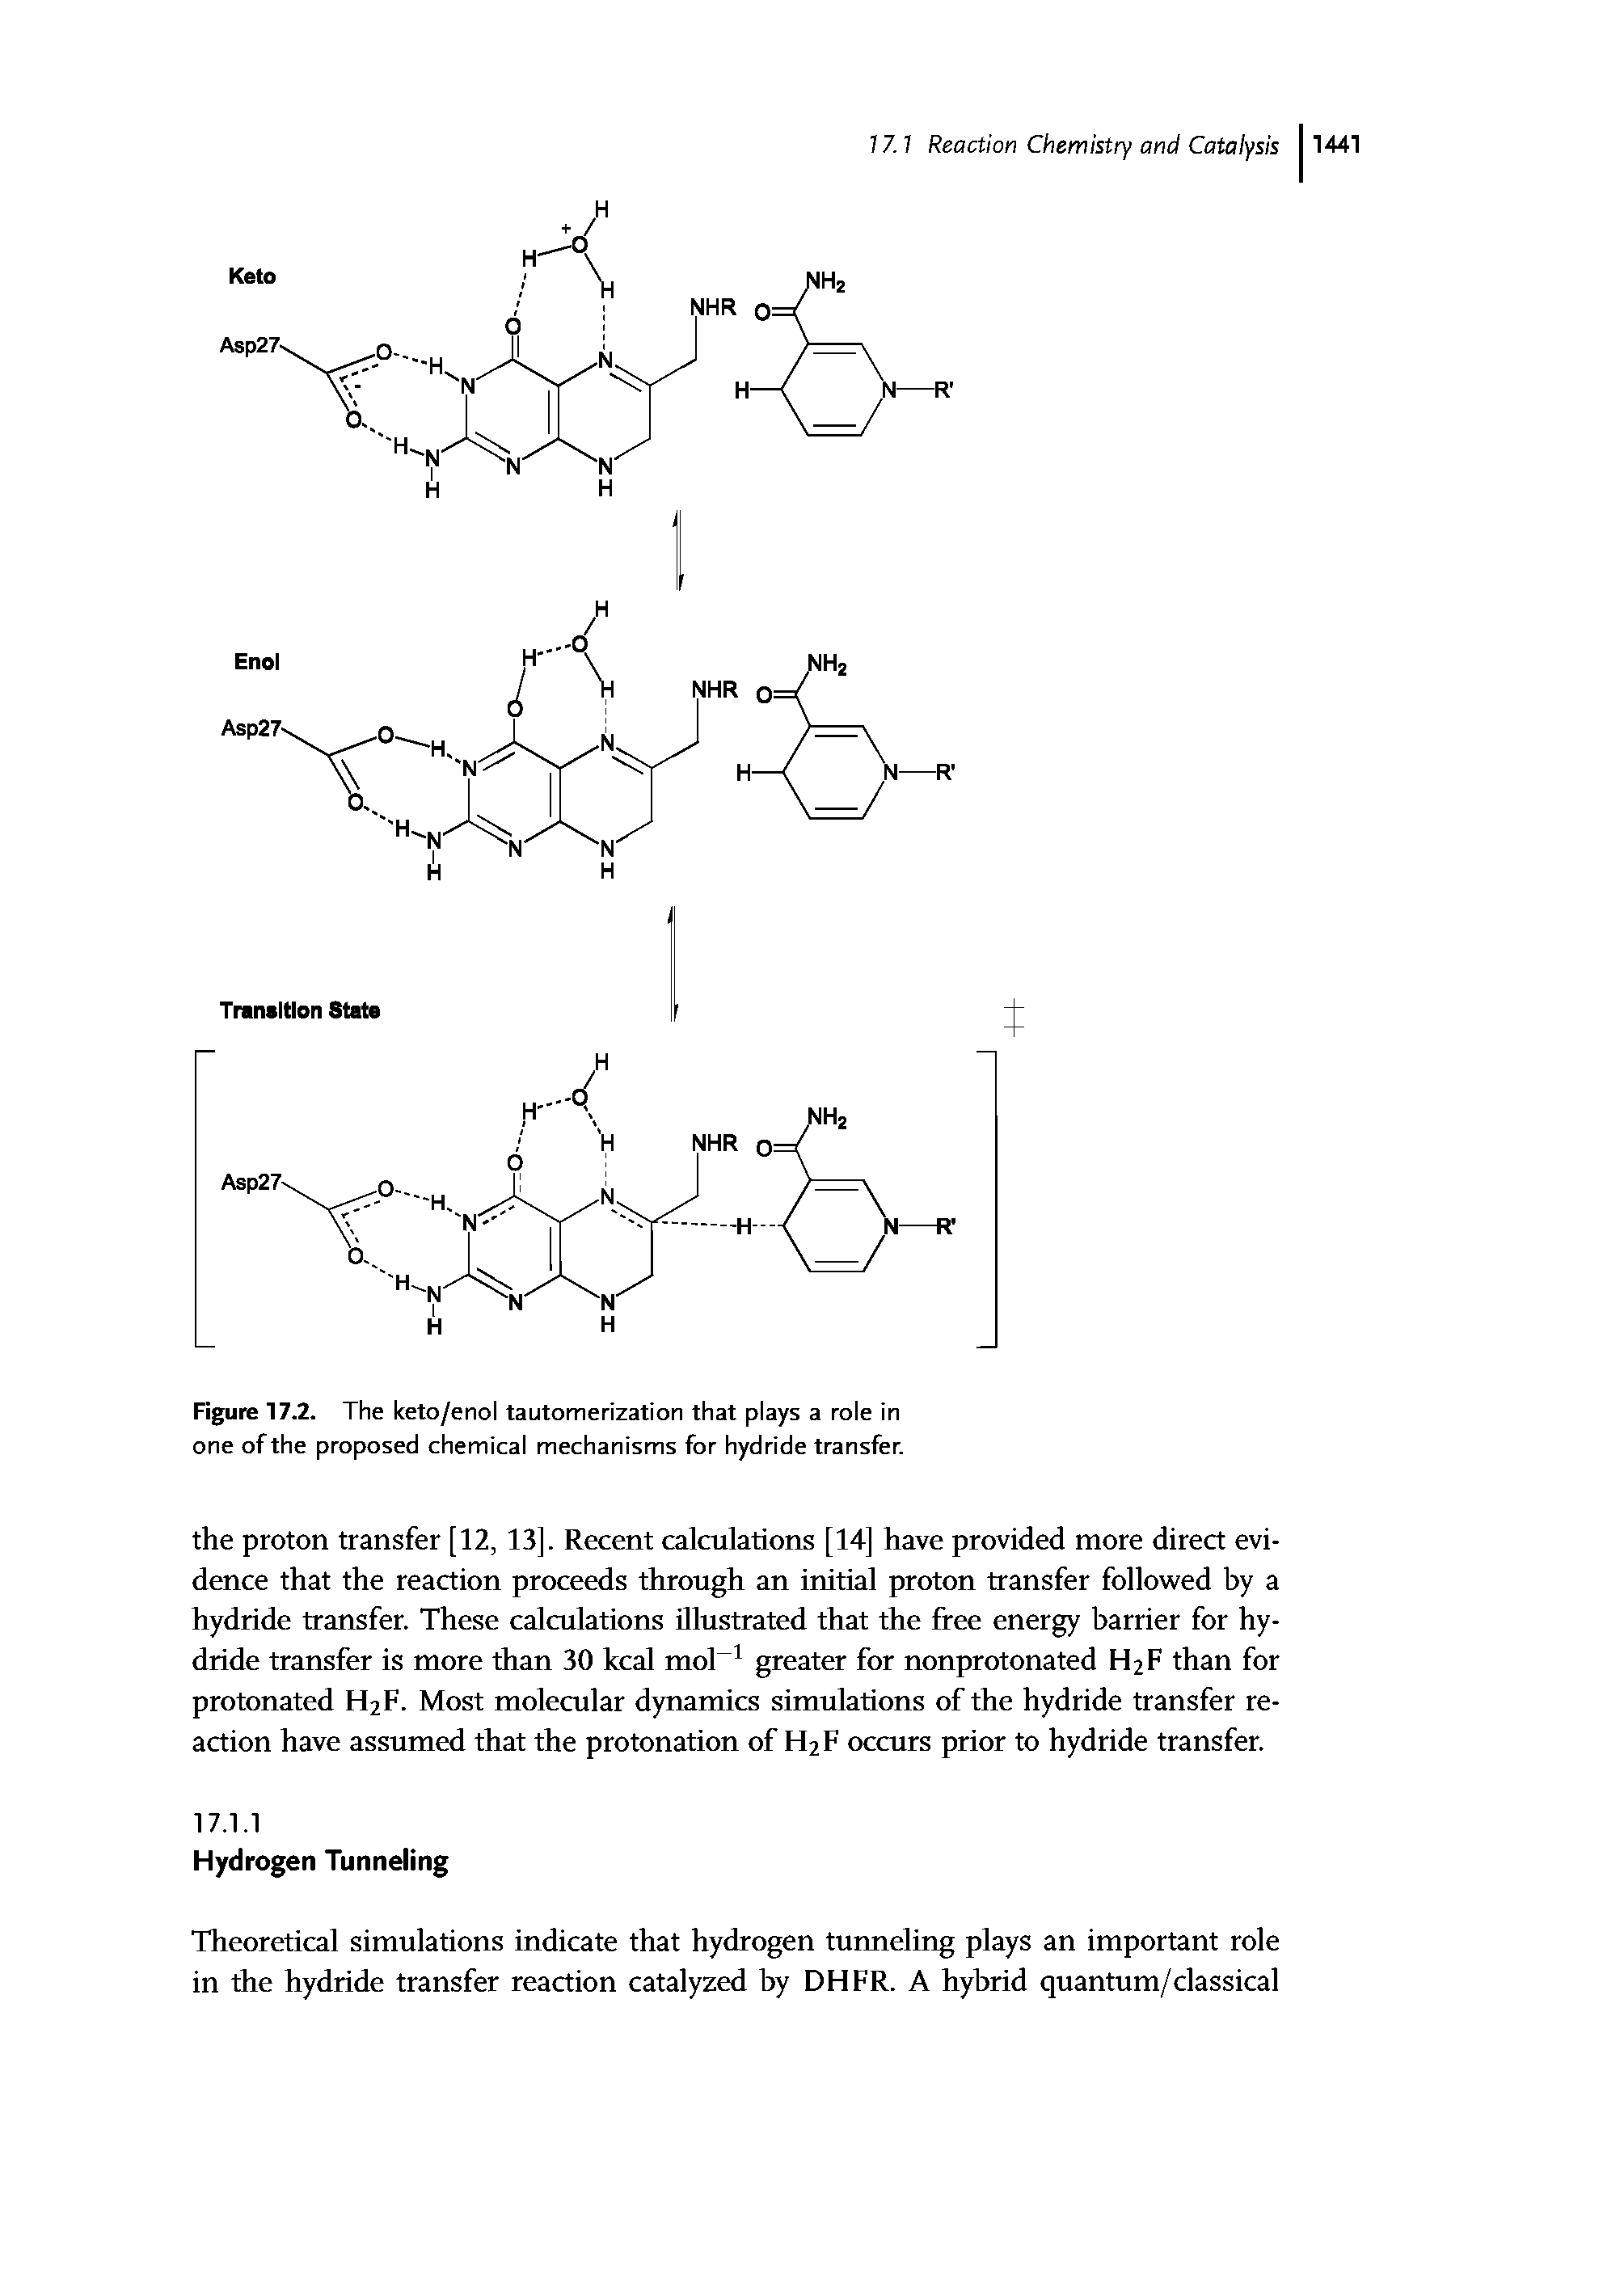 Figure 17.2. The keto/enol tautomerization that plays a role in one of the proposed chemical mechanisms for hydride transfer.